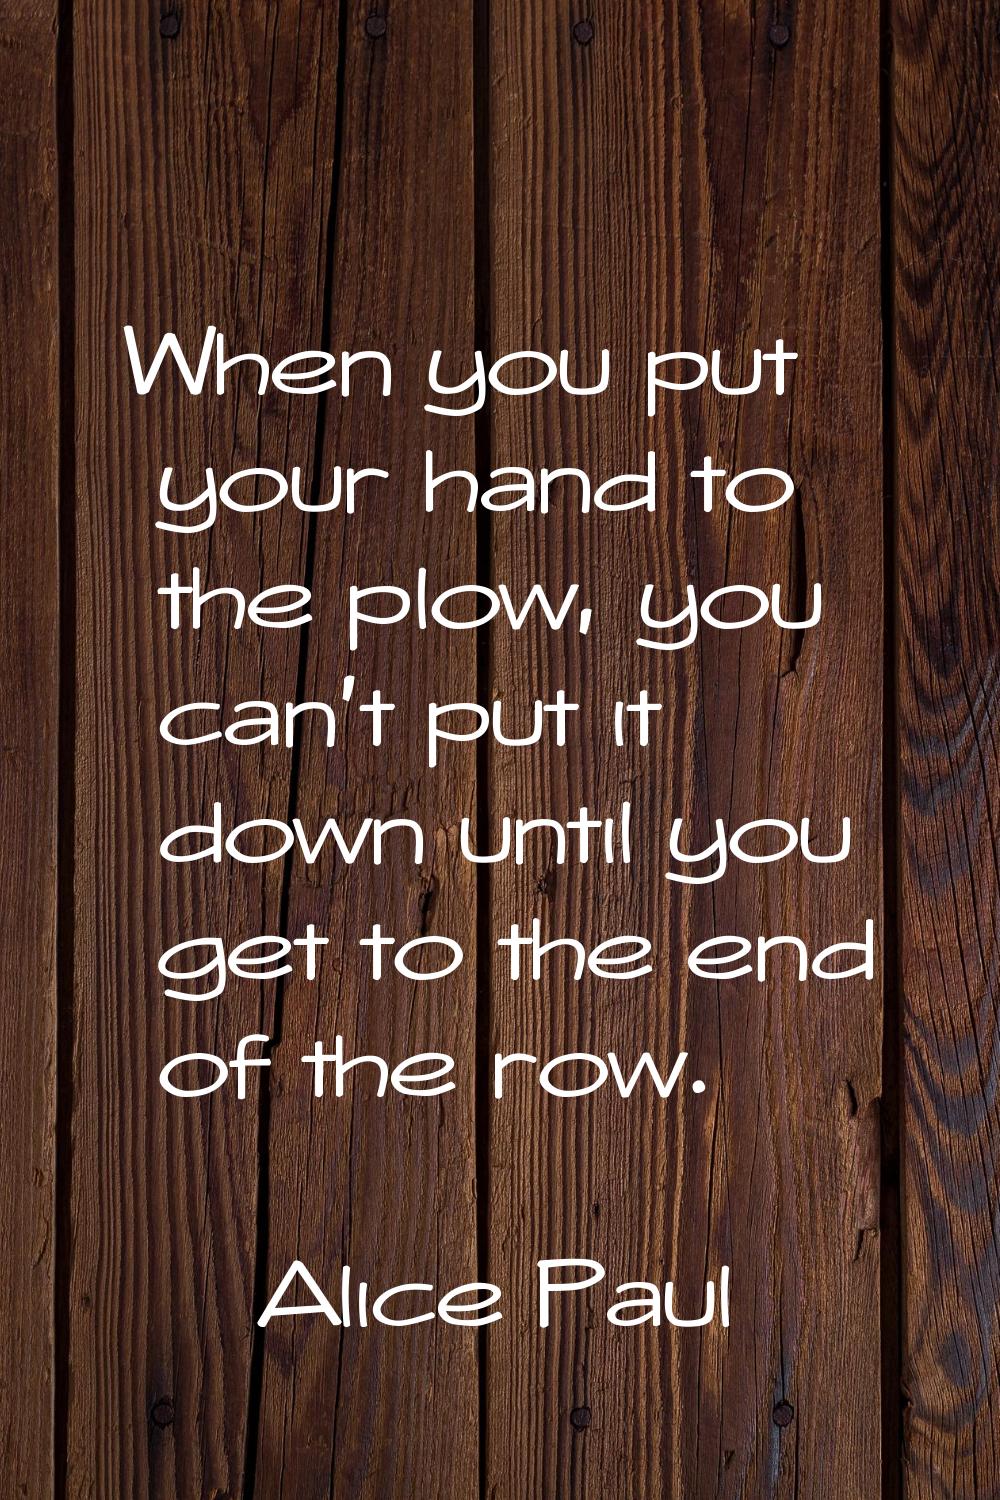 When you put your hand to the plow, you can't put it down until you get to the end of the row.